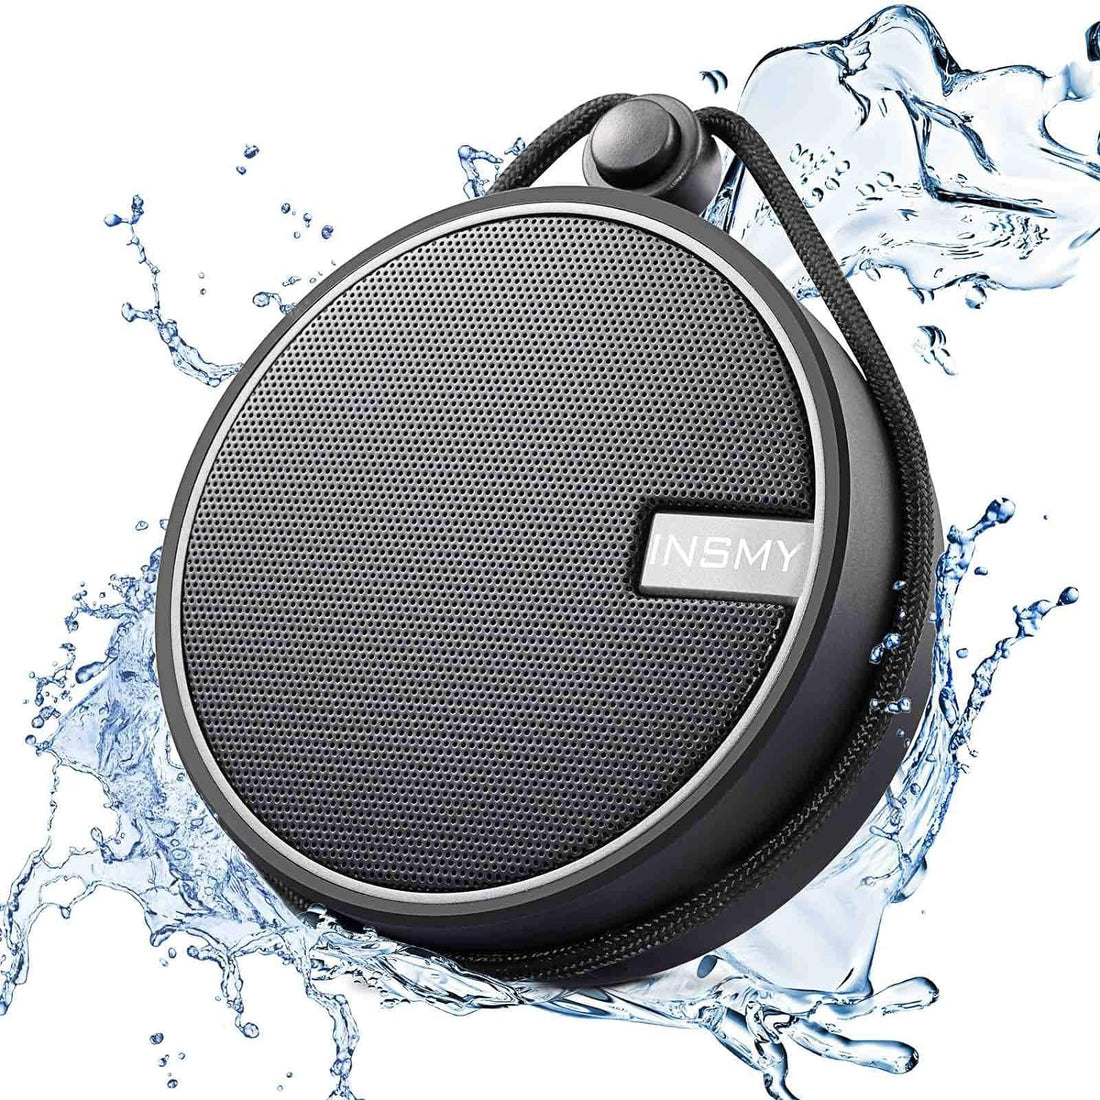 INSMY Portable Shower Speaker, IPX7 Waterproof Wireless Ourdoor Speaker with HD Sound, Support TF Card, Suction Cup for Home, Pool, Beach, Boating, Hiking